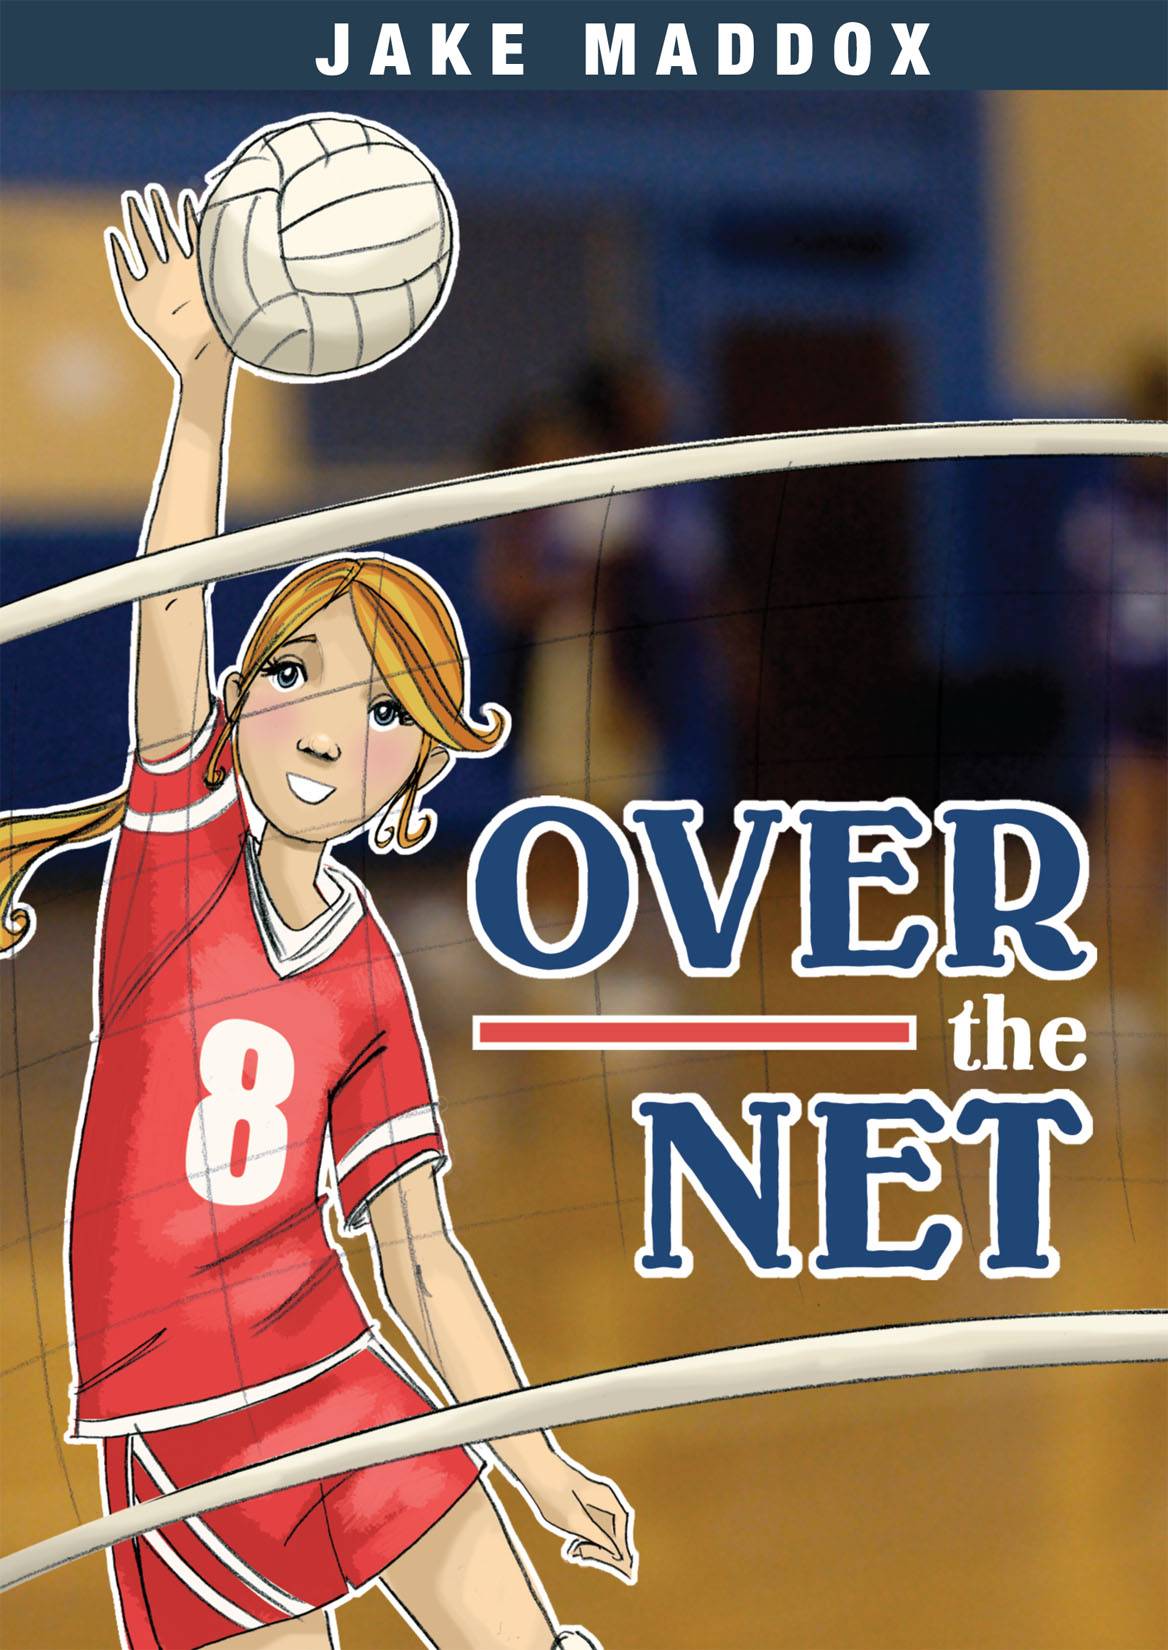 Over the Net (2009) by Jake Maddox